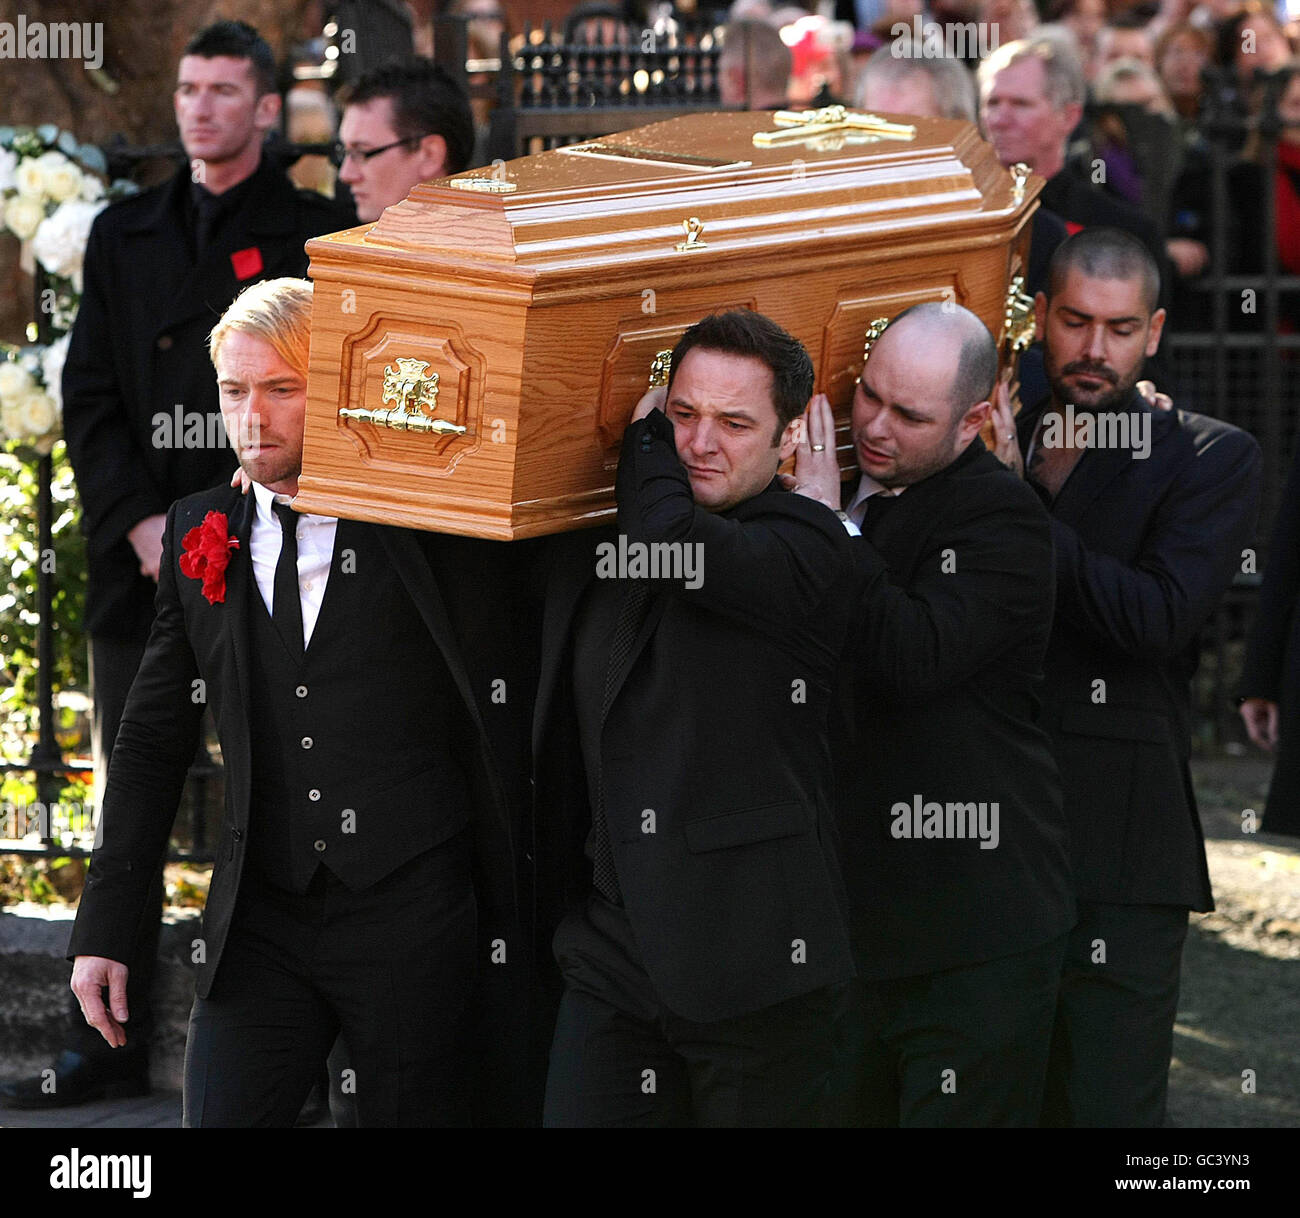 Boyzone members Ronan Keating (front left), Mikey Graham (front right) and Shane Lynch (back right) carry the coffin of Stephen Gately outside St Laurence O'Toole Church in Dublin where his funeral has been taking place. Stock Photo